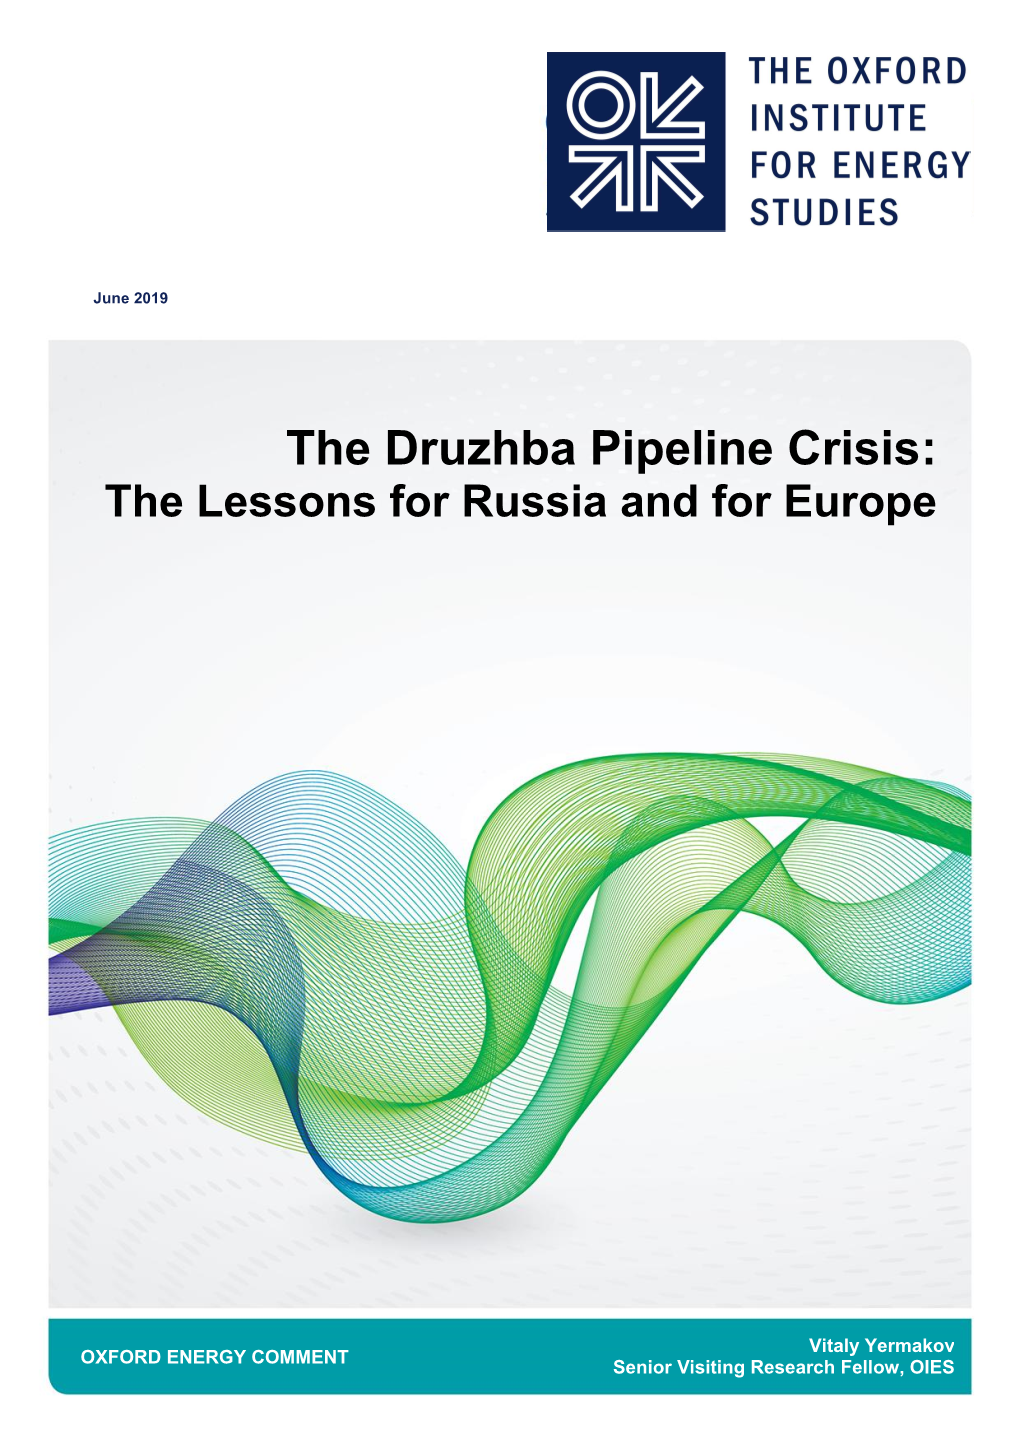 The Druzhba Pipeline Crisis: the Lessons for Russia and for Europe